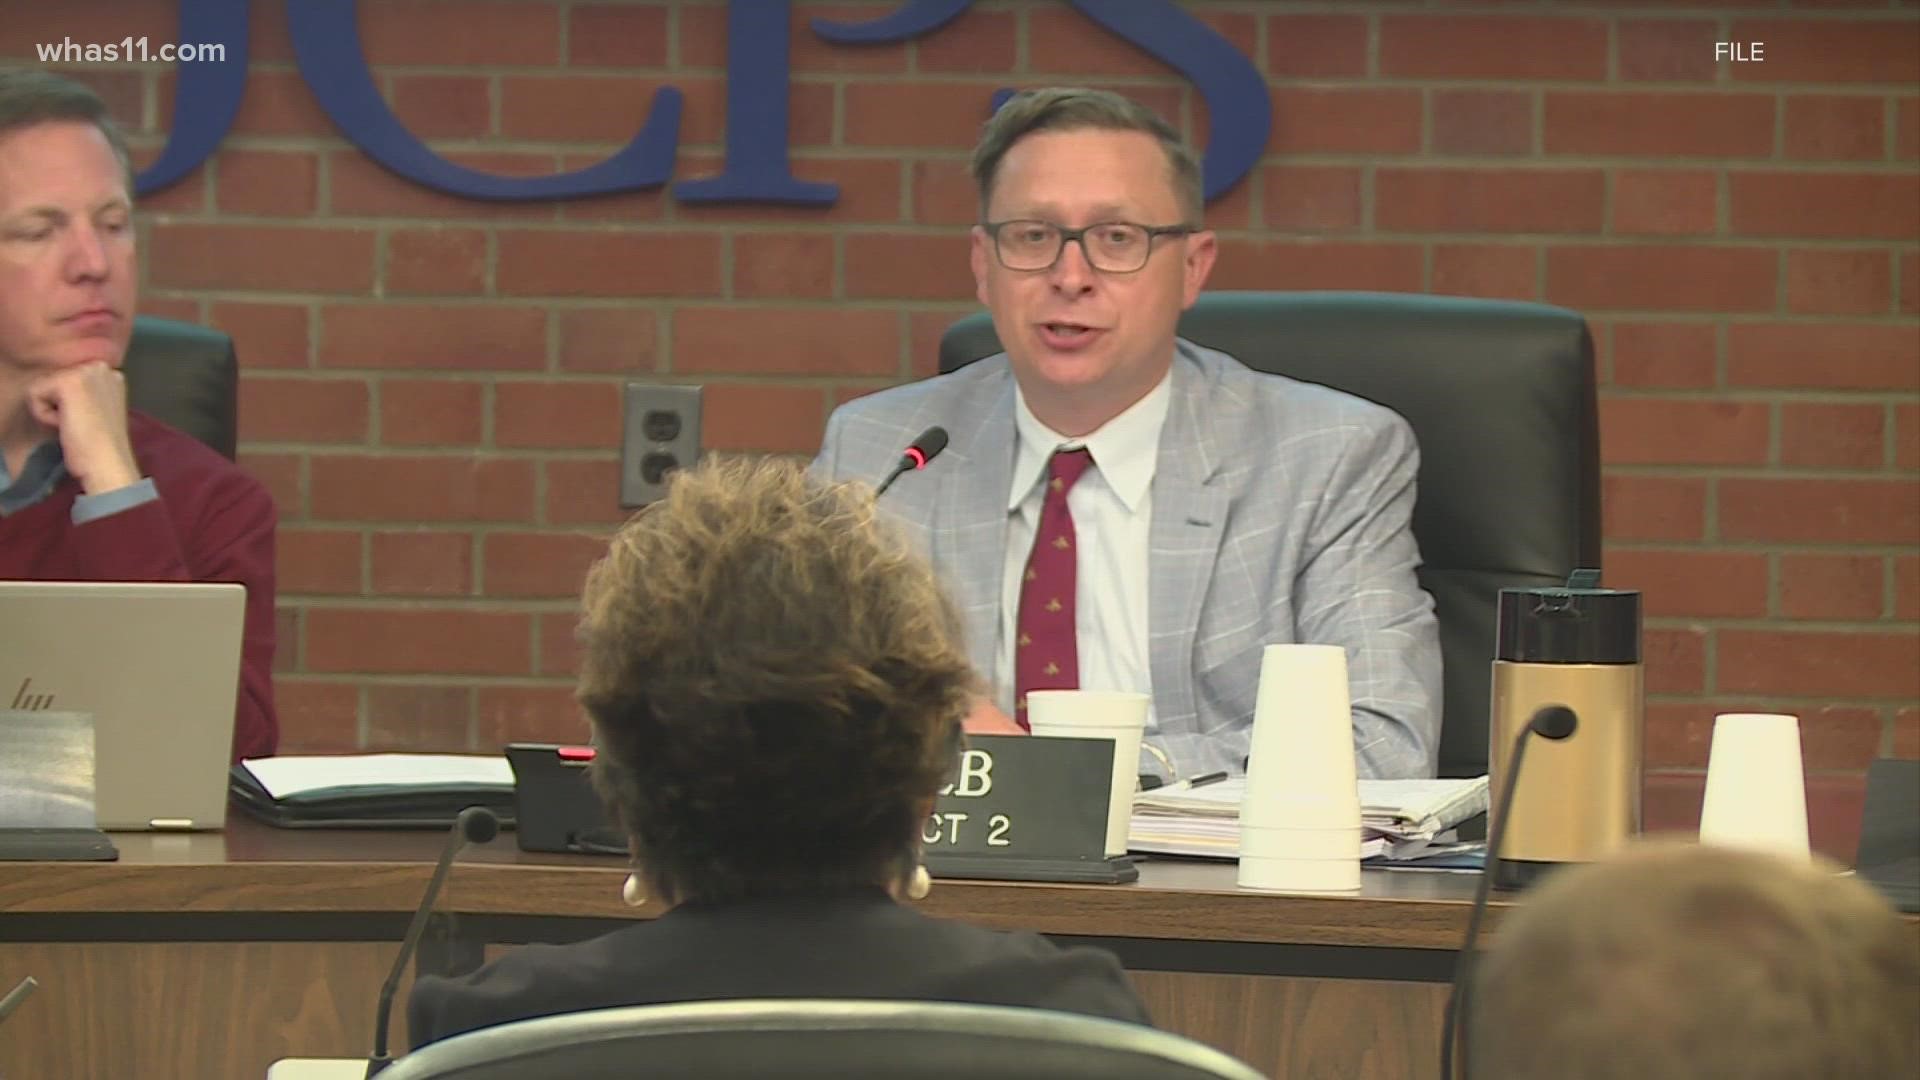 JCPS board member Chris Kolb confirms he is resigning from his leadership position on the JCPS school board amid controversy over a tweet to a state lawmaker.